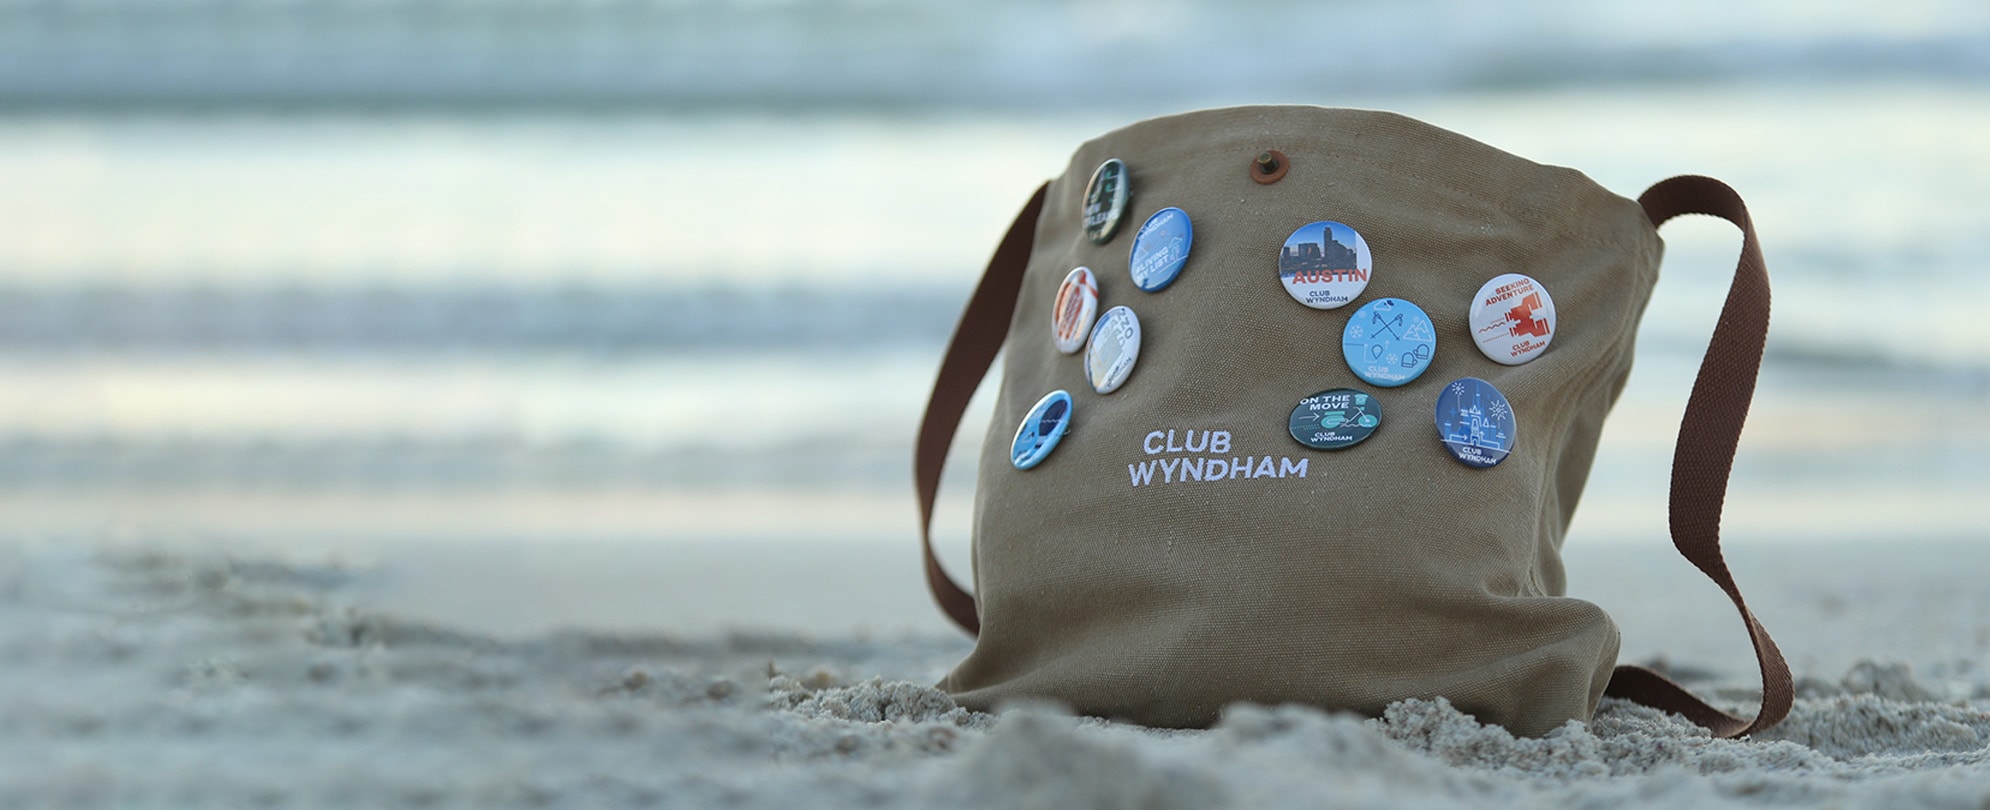 A club Wyndham canvas bag with ten pins is in the sand on a beach.